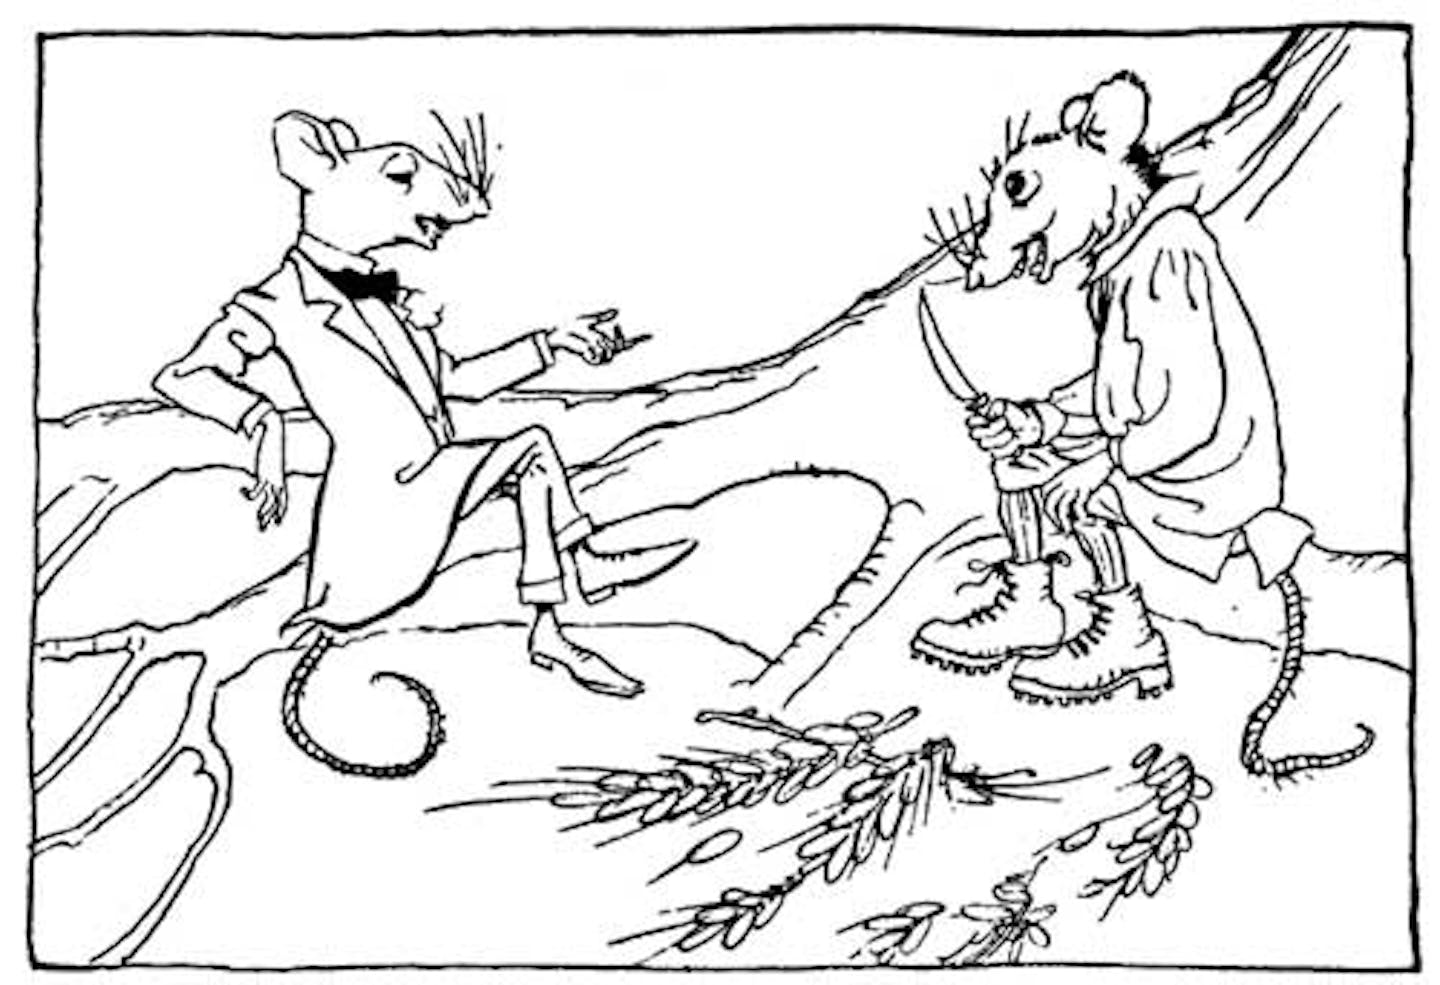 An illustration of two mice from a translation of Aesop's Fables published in 1912.